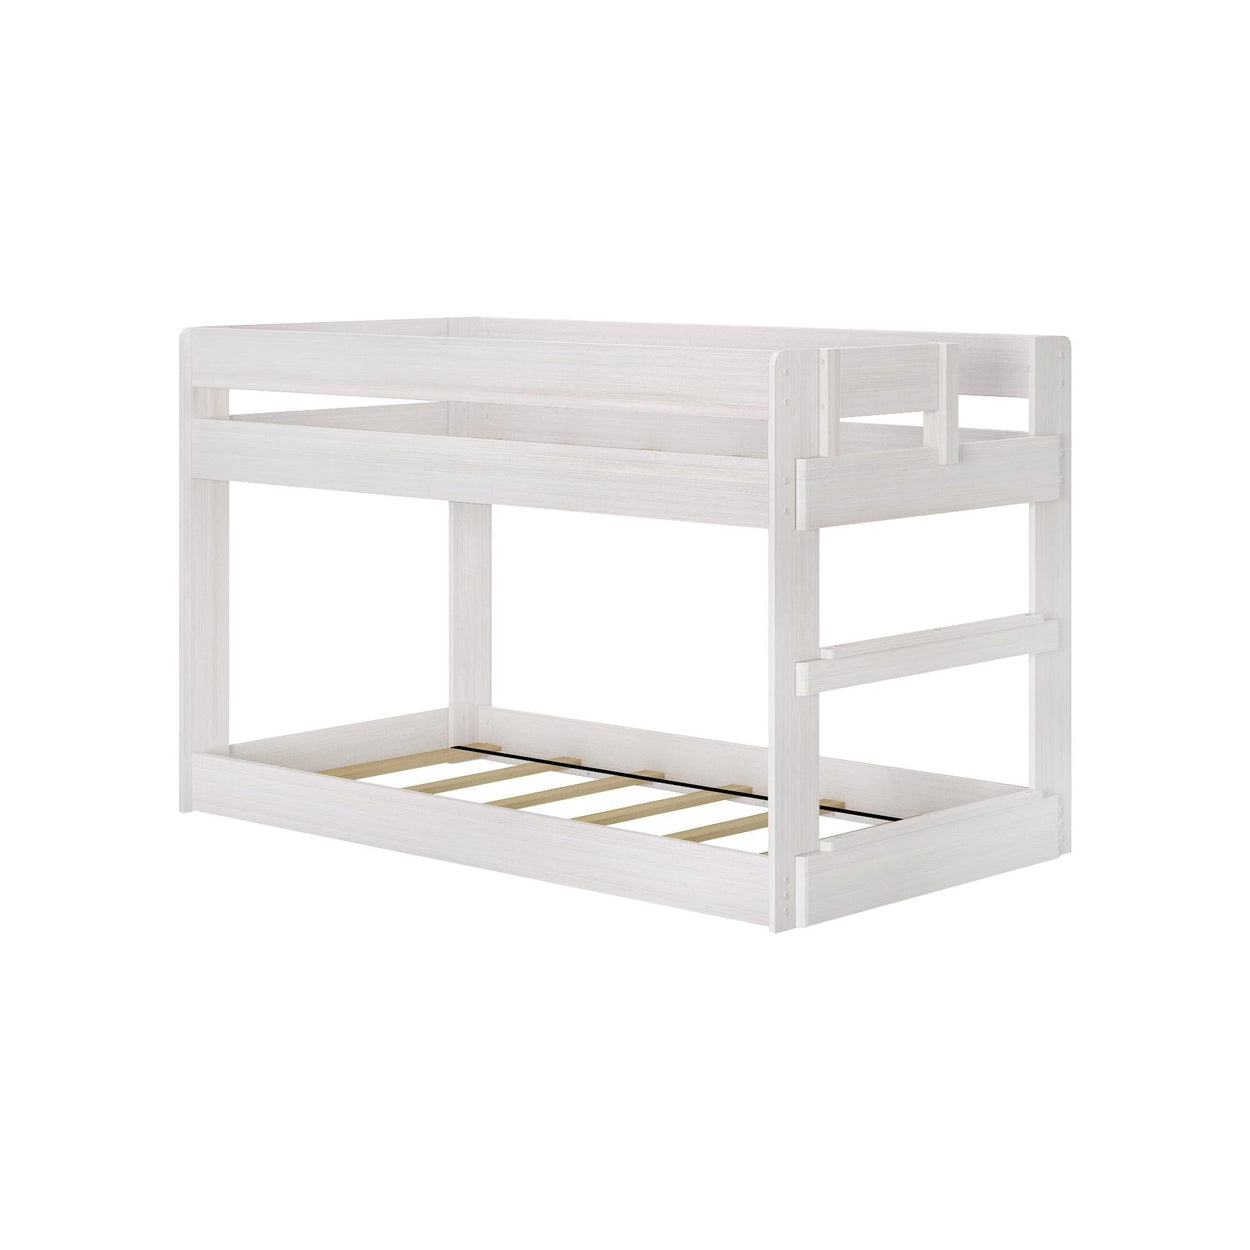 190214-182 : Bunk Beds Farmhouse Twin over Twin Low Bunk Bed, White Wash